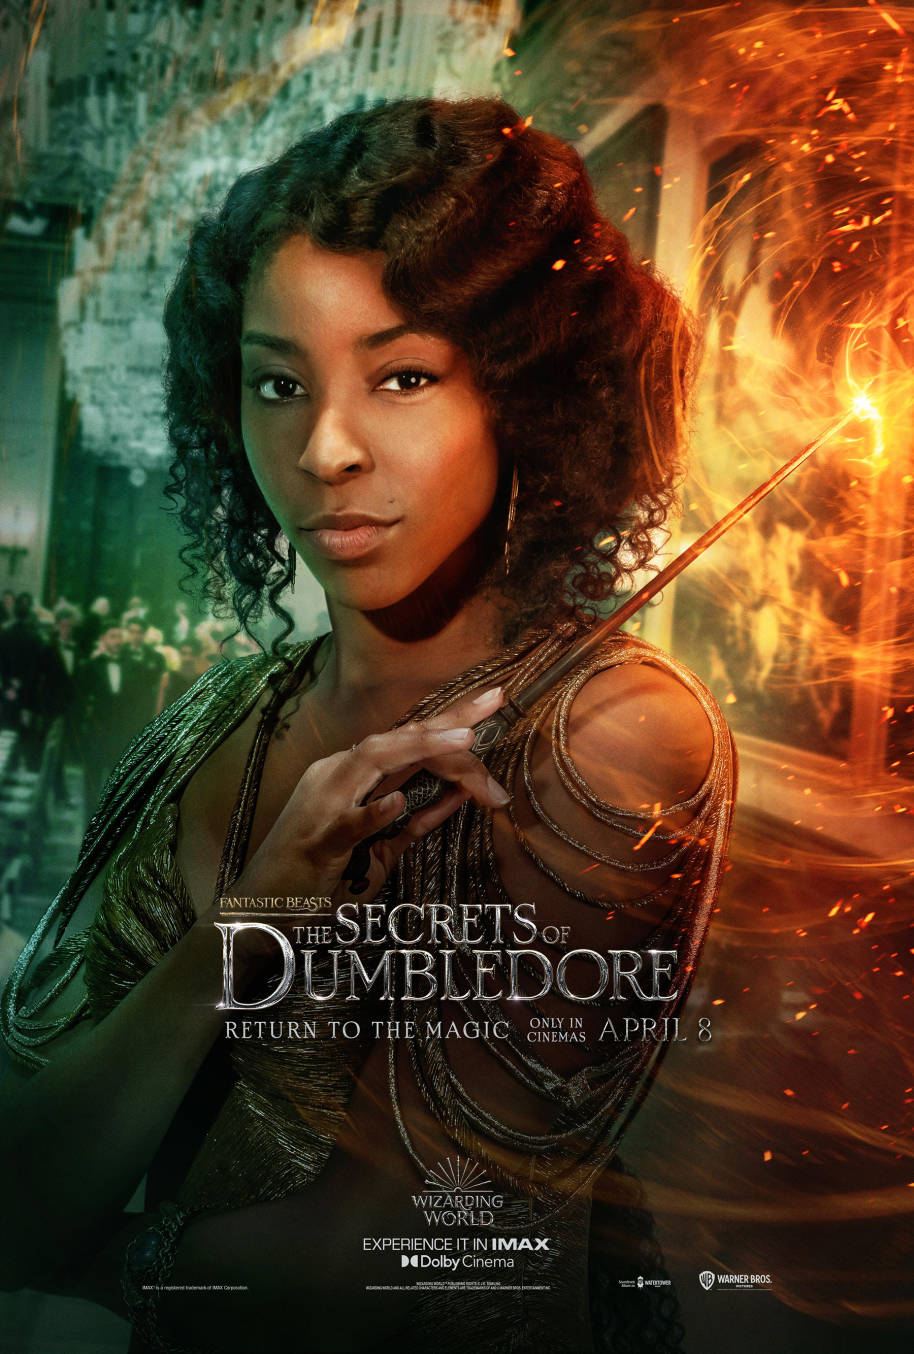 Jessica Williams as Lally Hicks in the Fantastic Beasts: the Secrets of Dumbledore poster